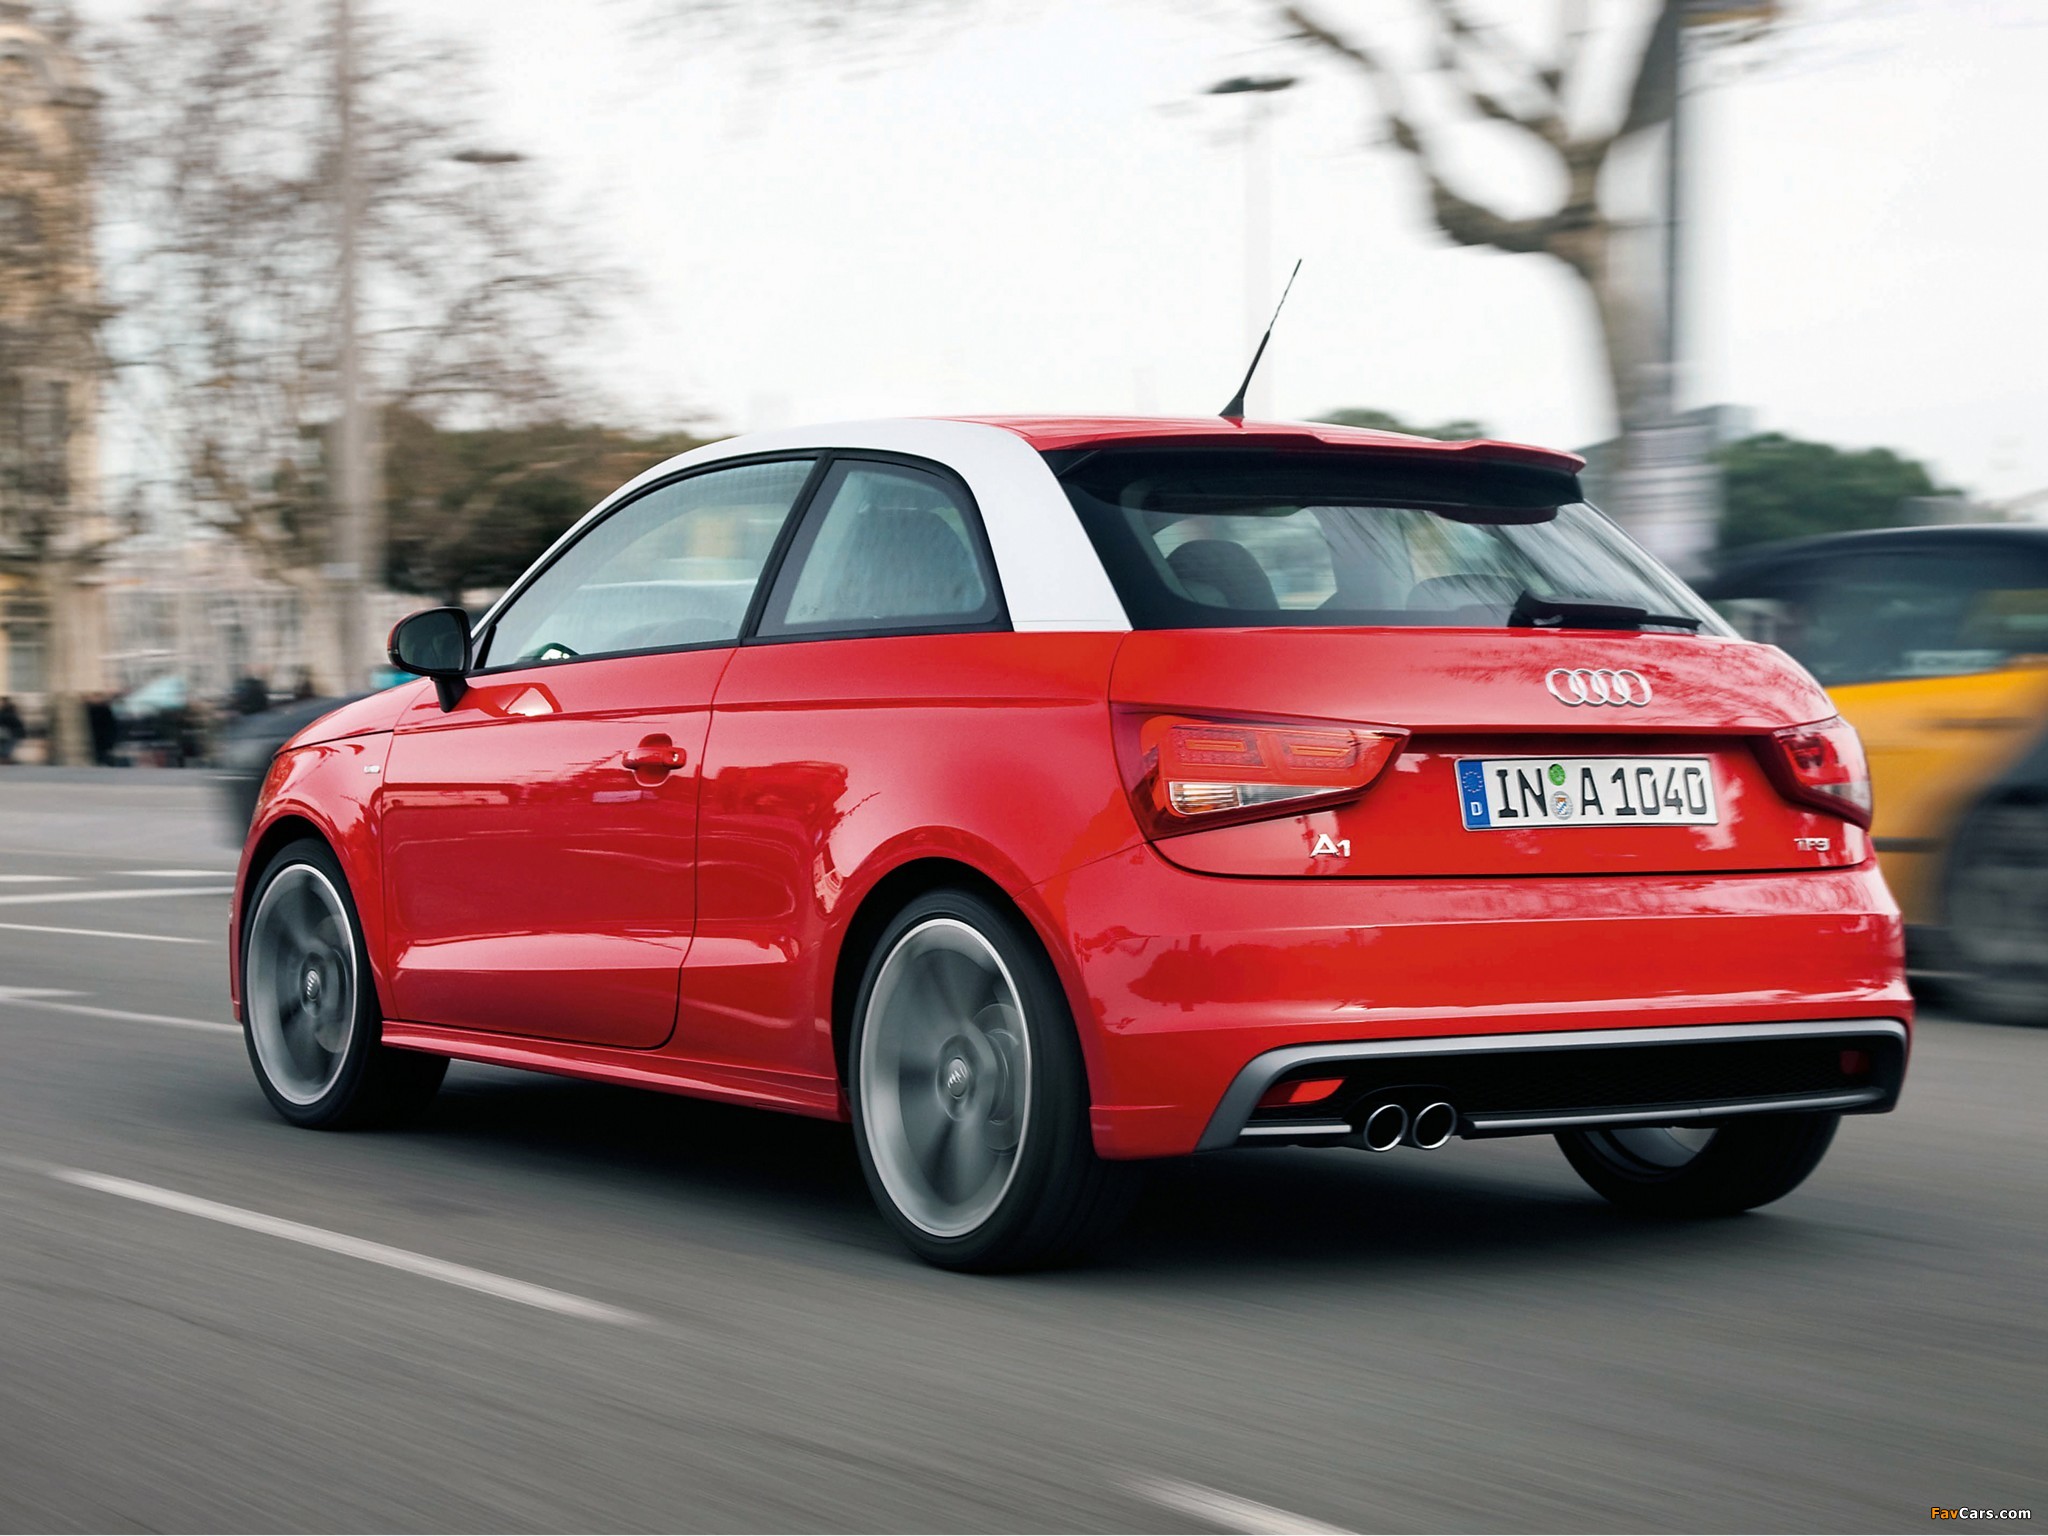 Audi A1 TFSI S-Line 8X (2010) pictures (2048 x 1536)